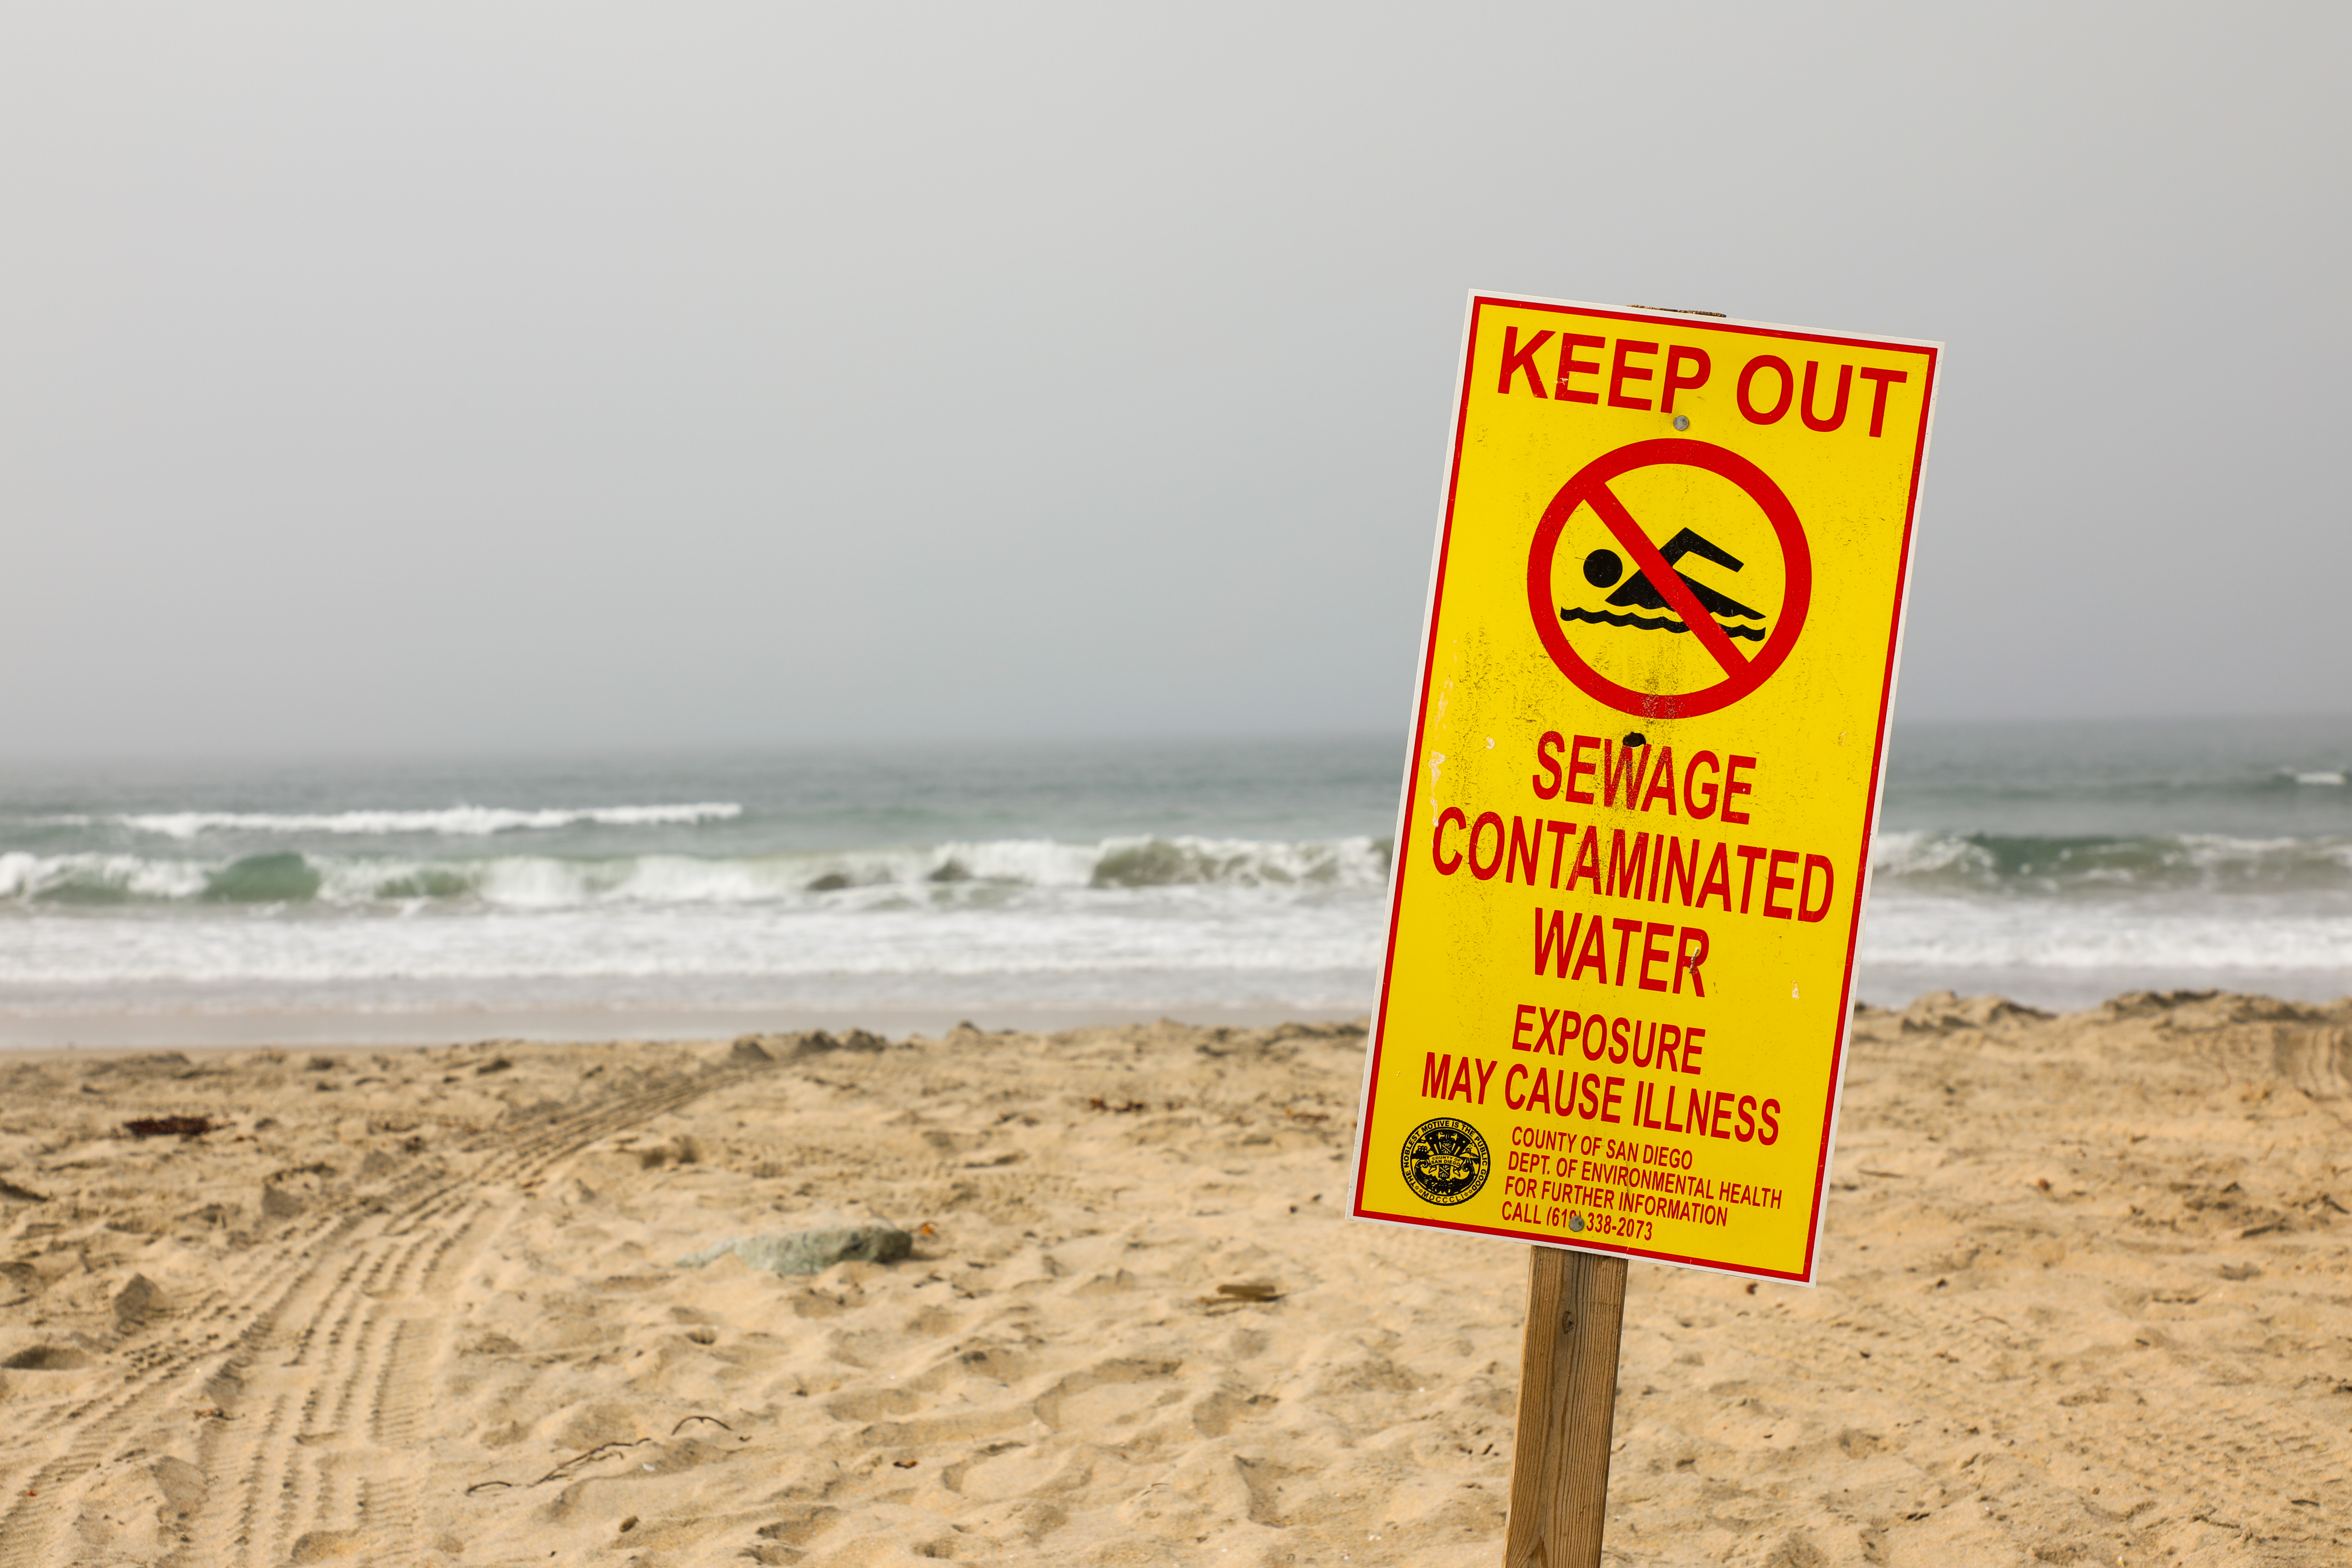 Sewage Contaminated Water sign on beach